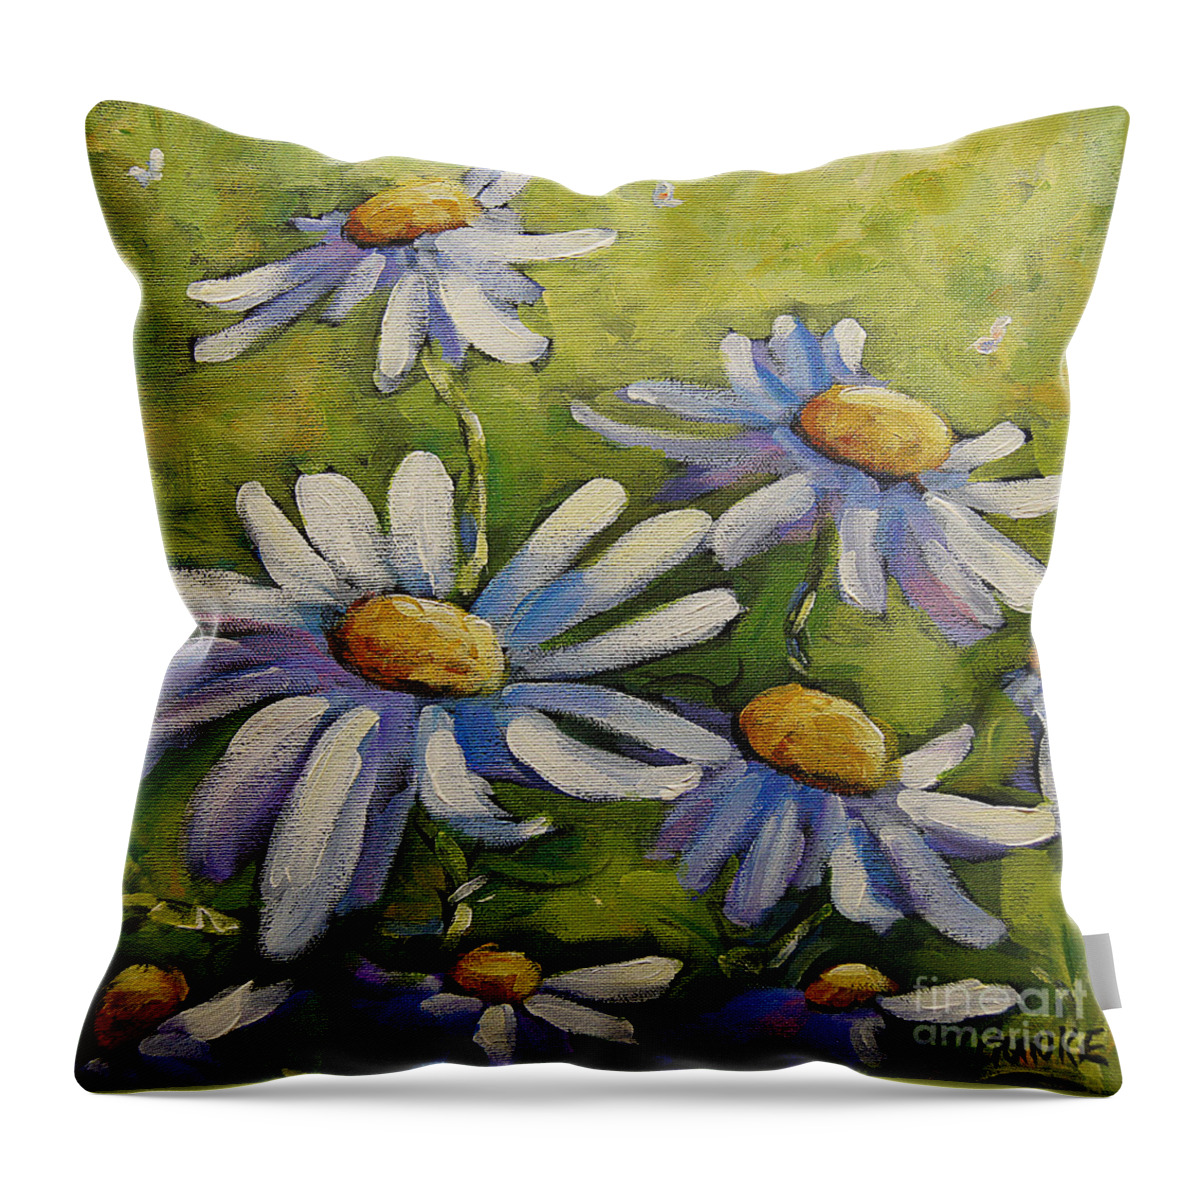 Daisies Flowers Throw Pillow featuring the painting Smiling Daisies by Prankearts by Richard T Pranke